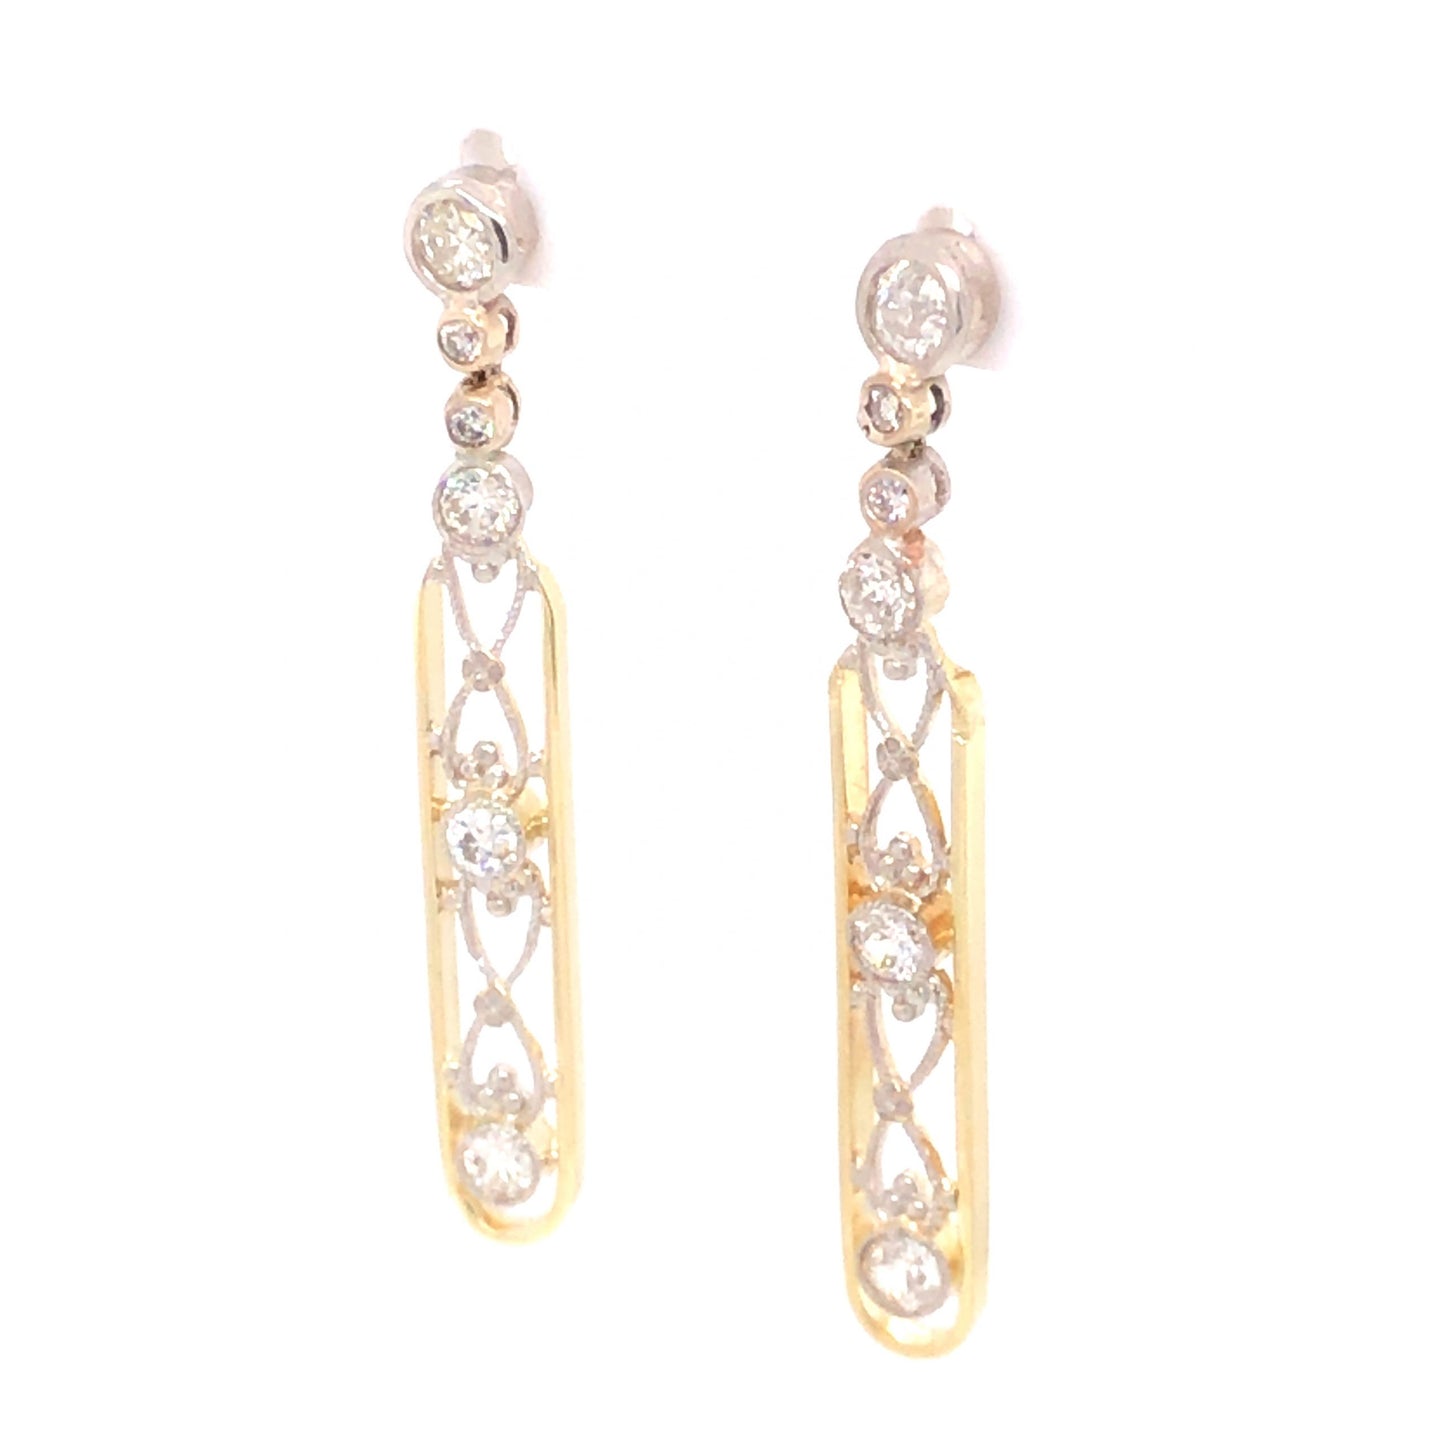 1.14 Art Deco Diamond Earrings in 14k Yellow Gold and Platinum